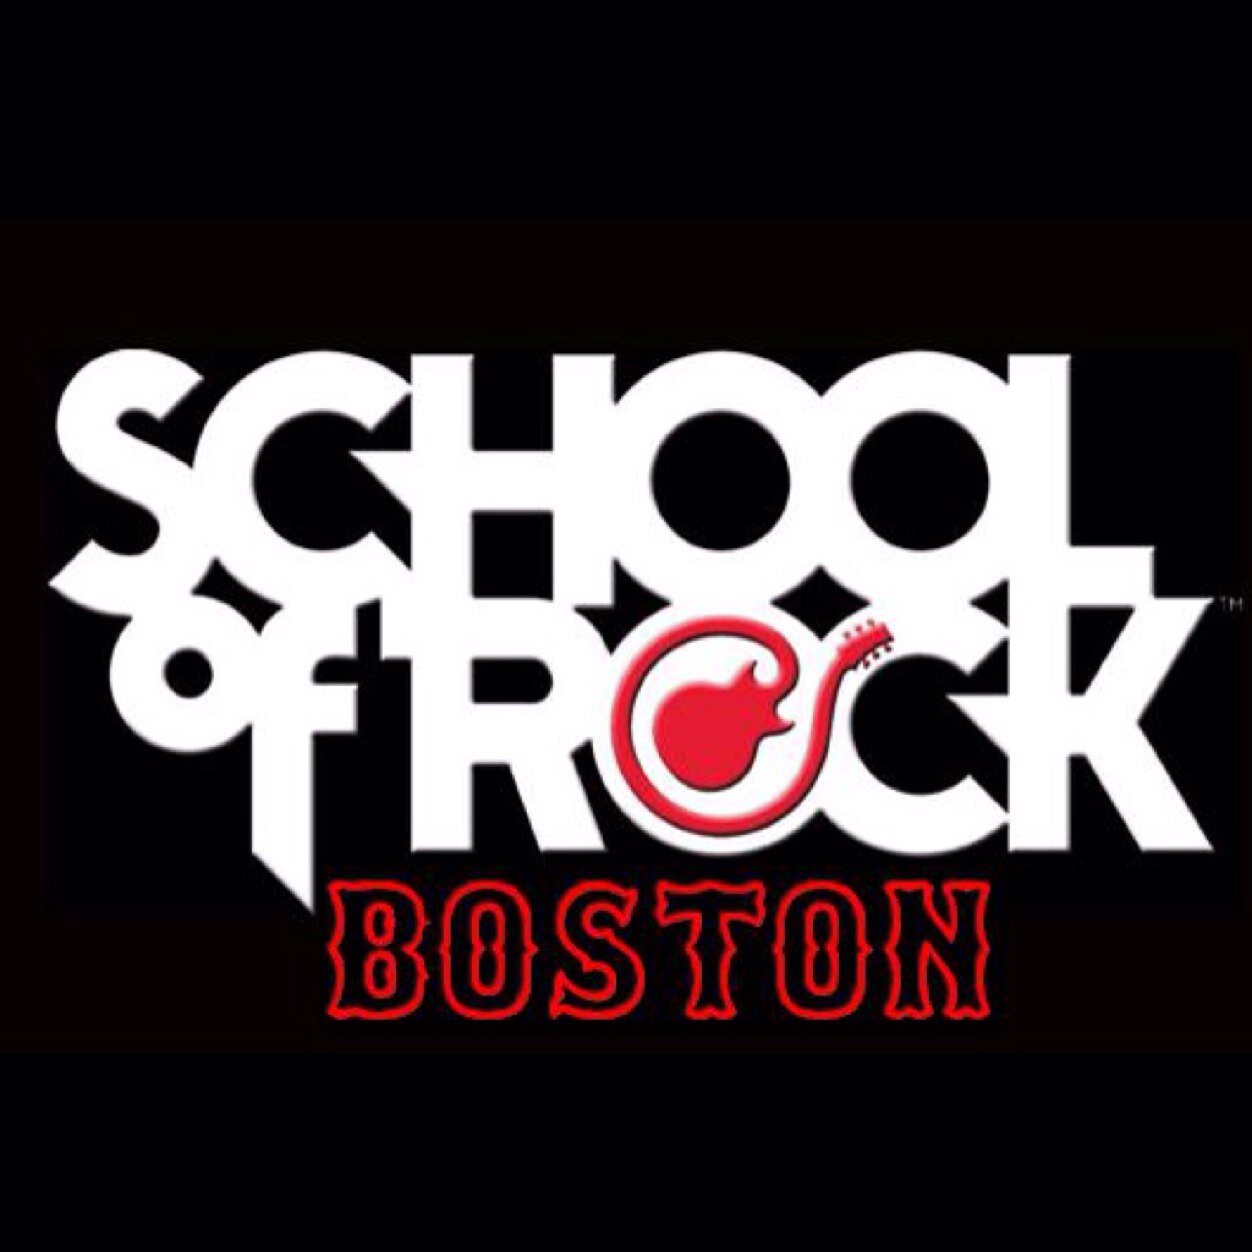 🤘Rock With Us! Year-round music school for kids & adults offering lessons, group performance + audio production programs, rock camps. Book a free trial lesson.